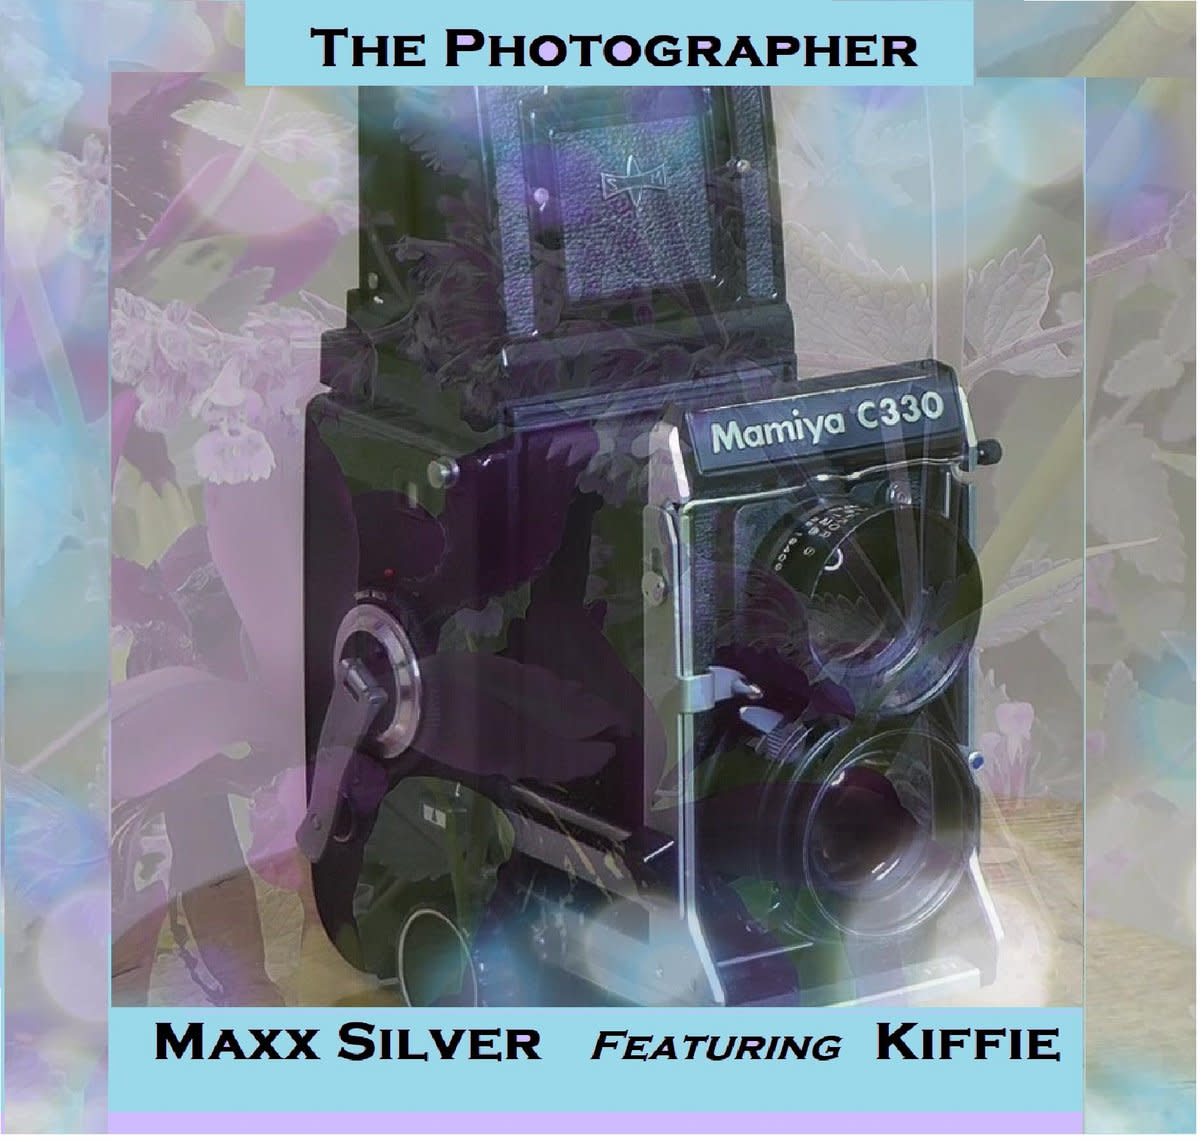 synth-single-review-the-photographer-by-maxx-silver-and-kiffie